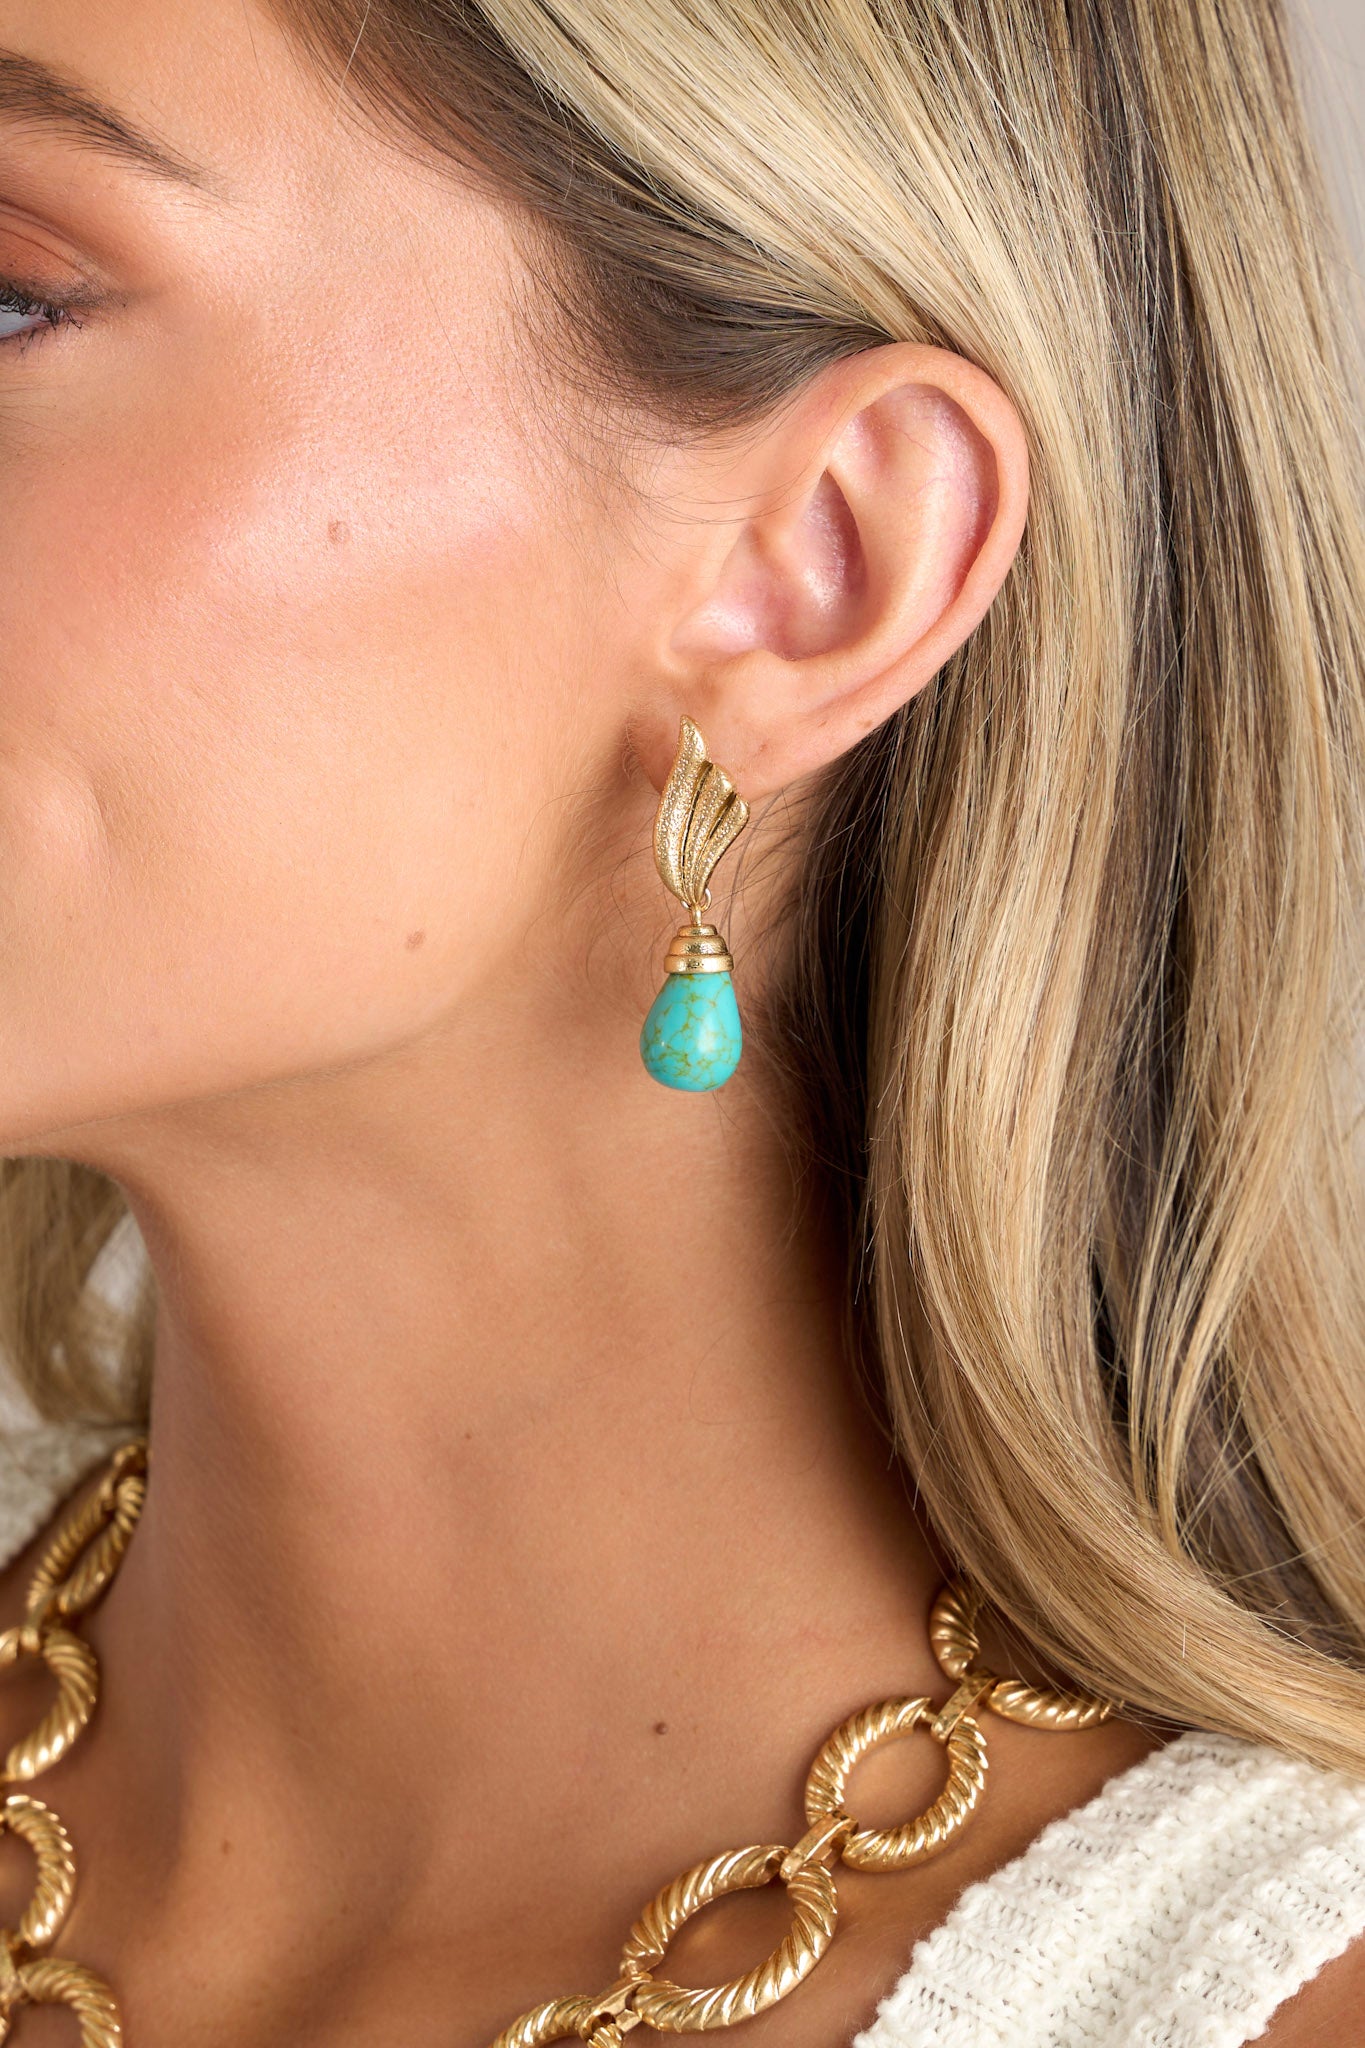 Close-up view of these gold earrings that feature textured winged studs, a turquoise stone drop pendant, and secure post backings.